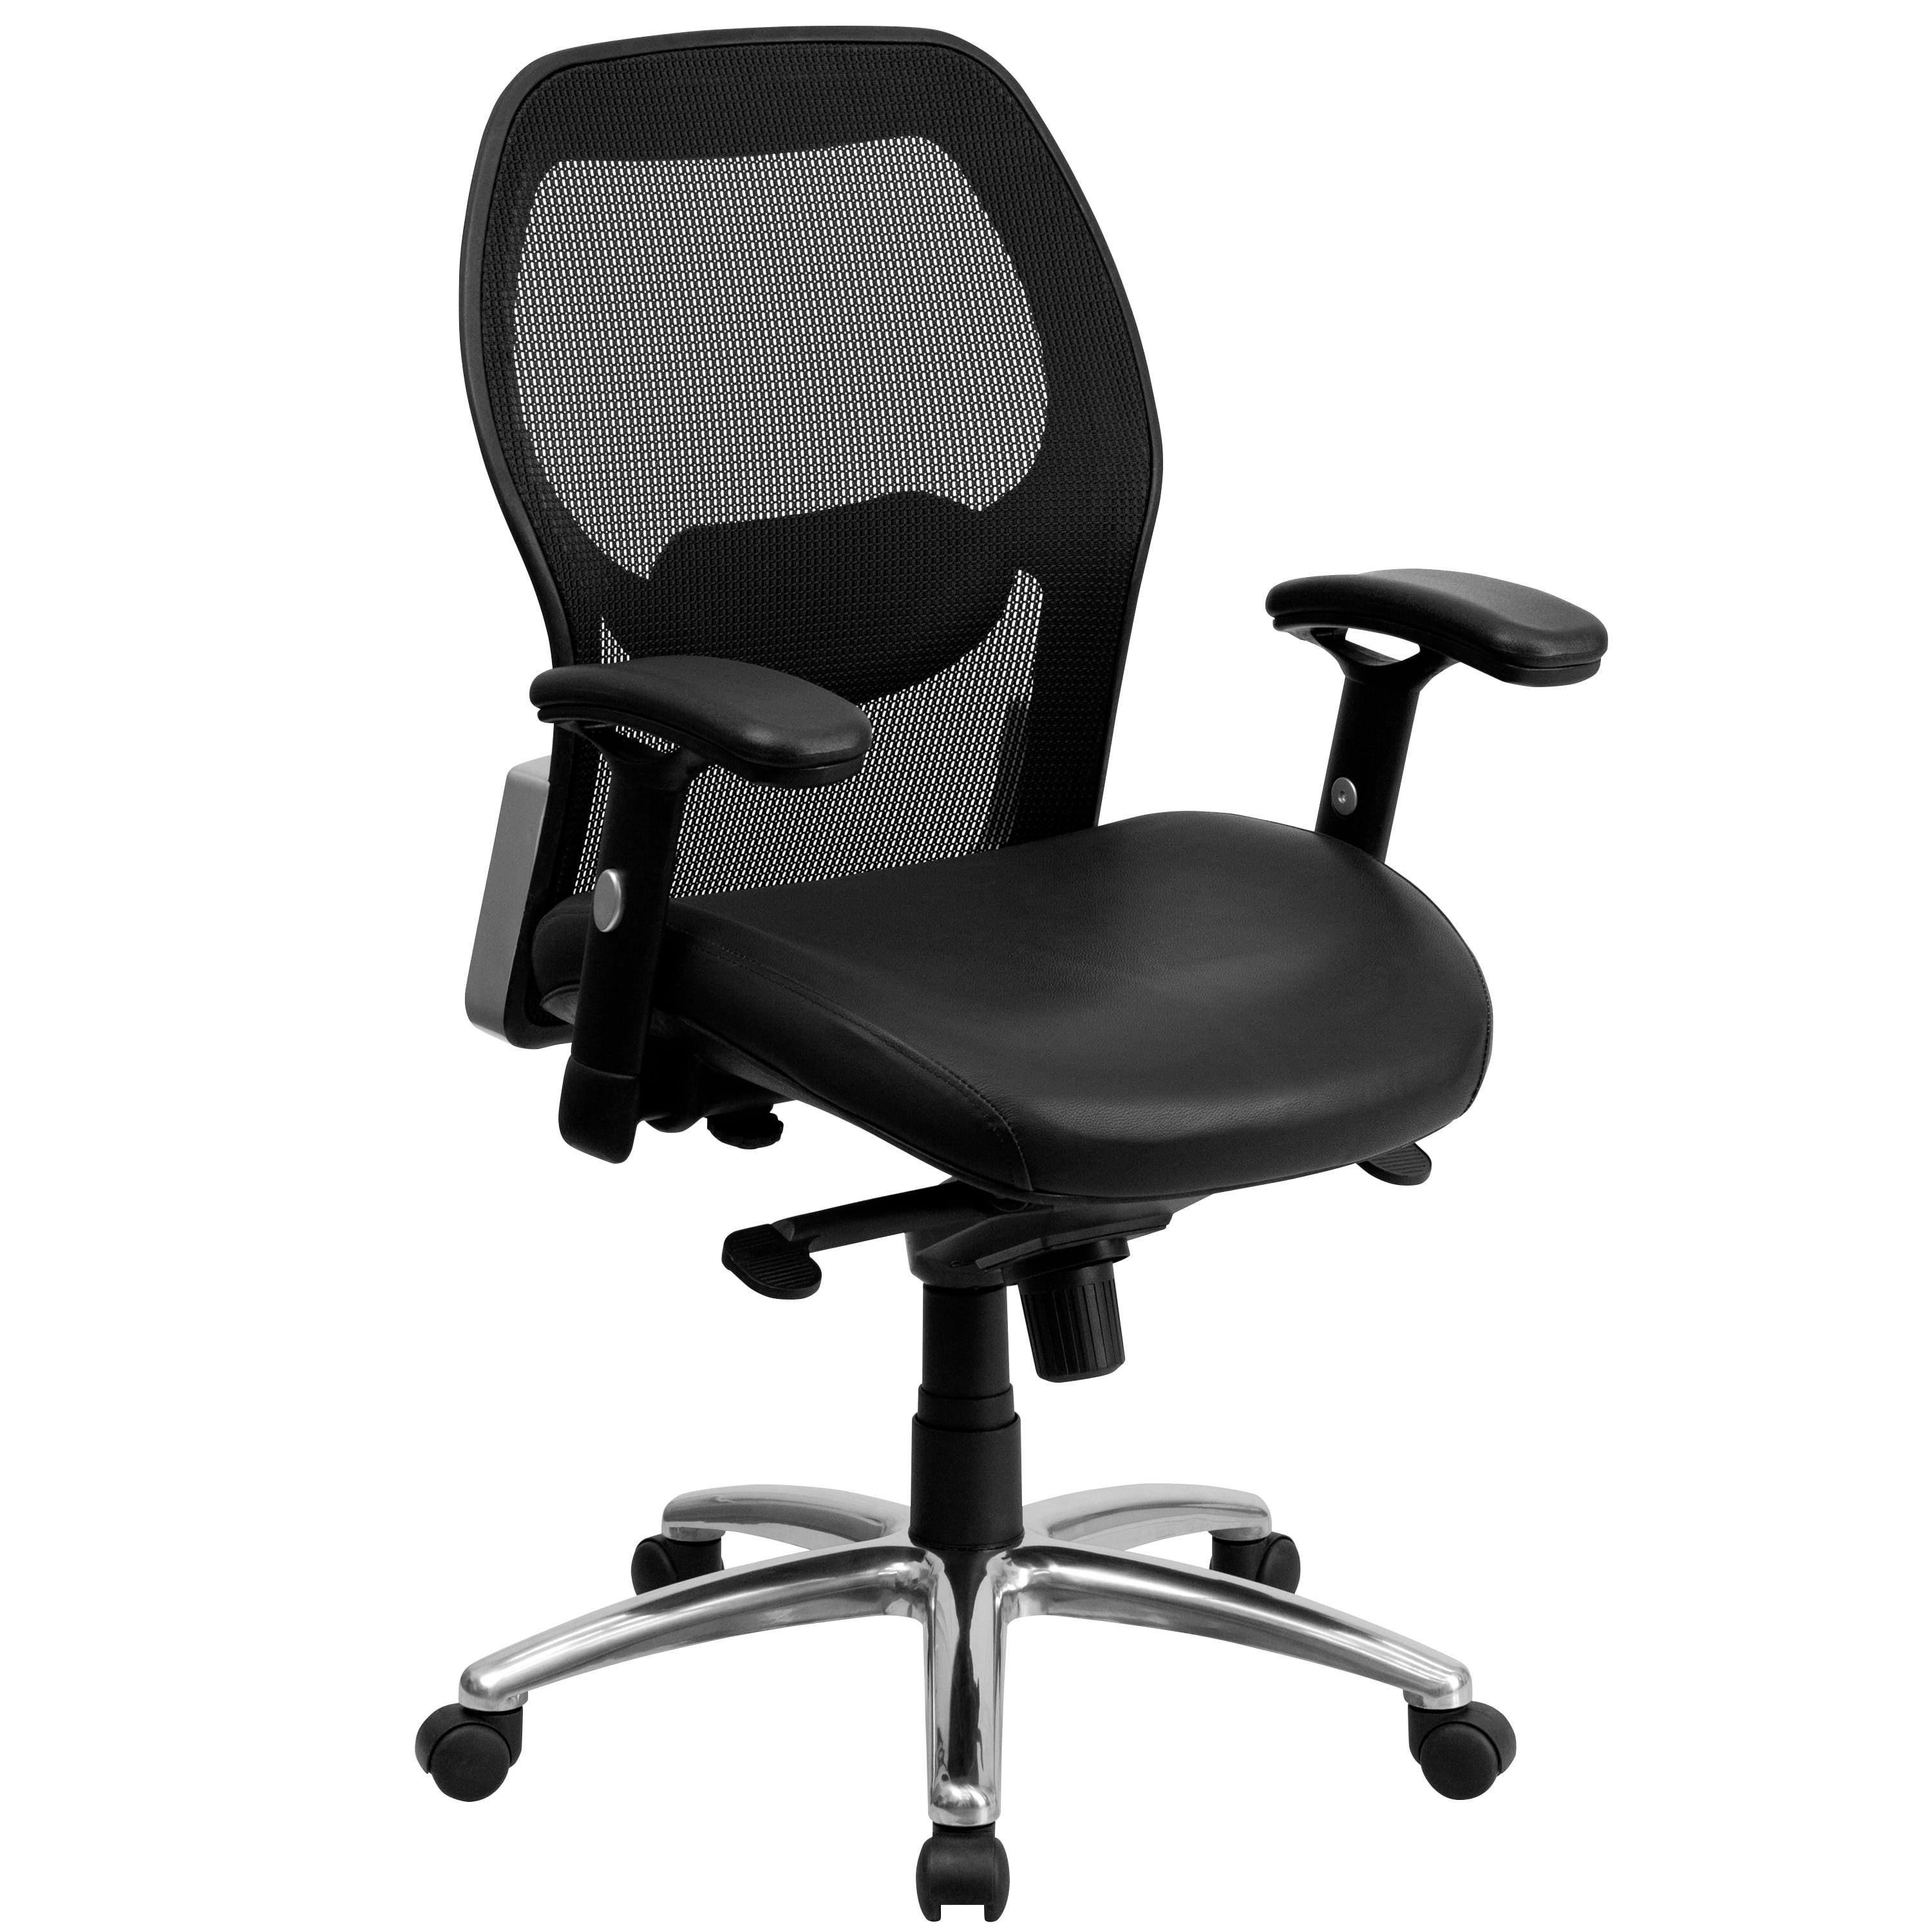 Mid-Back Swivel Executive Office Chair with Adjustable Arms in Black Leather/Mesh